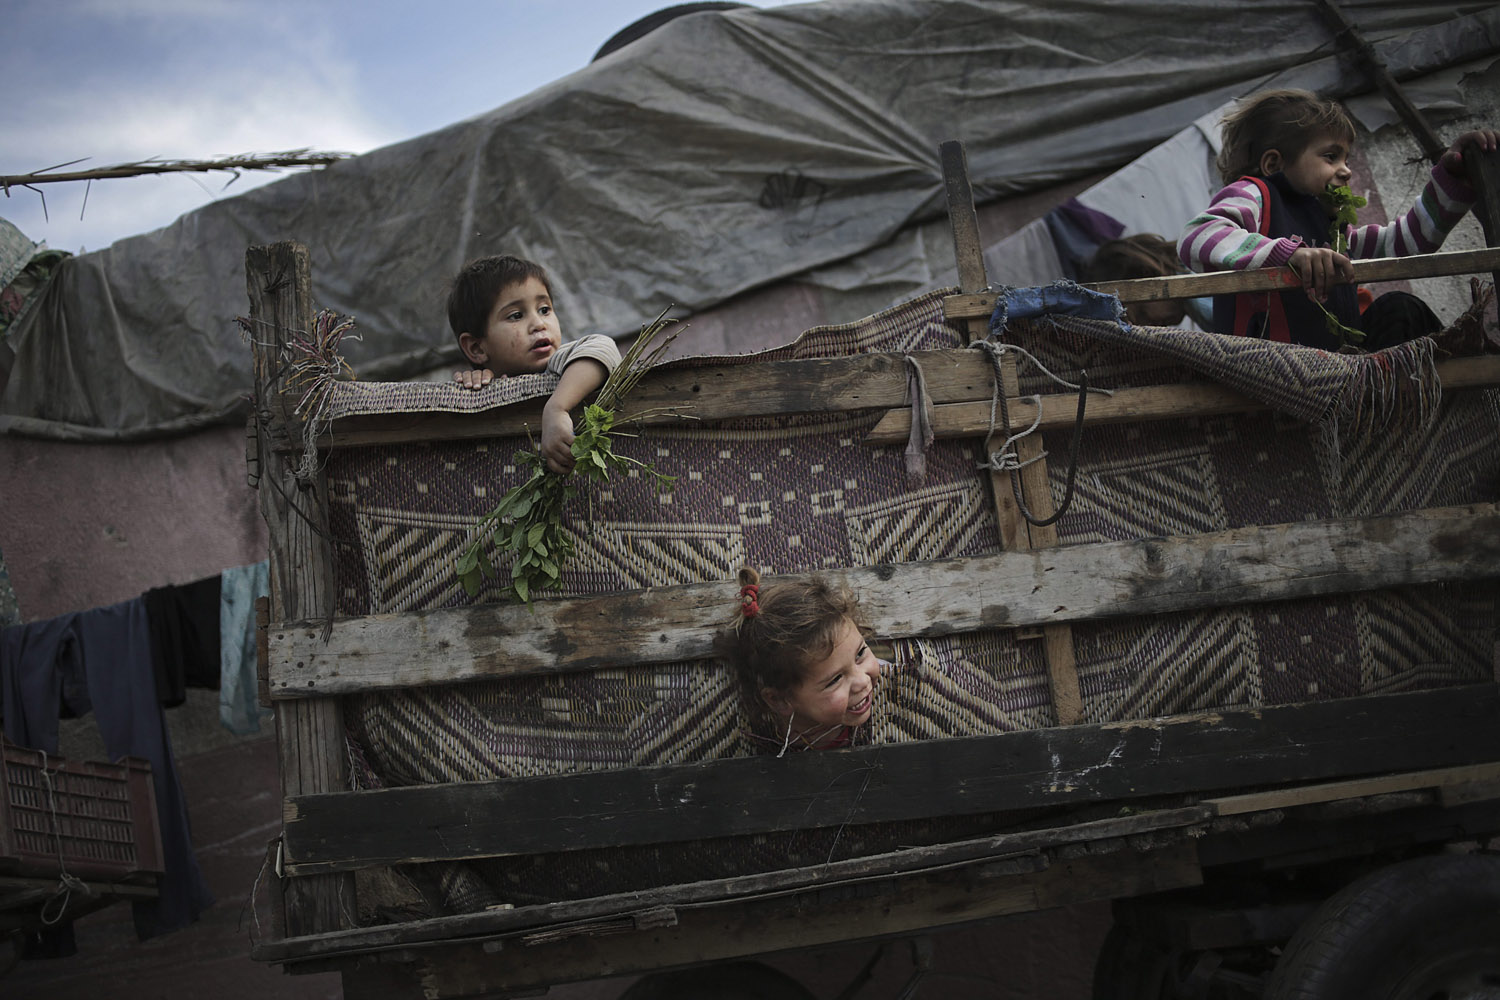 May 16, 2013. Palestinian refugee children play in a poverty-stricken quarter of the town of Beit Lahiya, northern Gaza Strip.